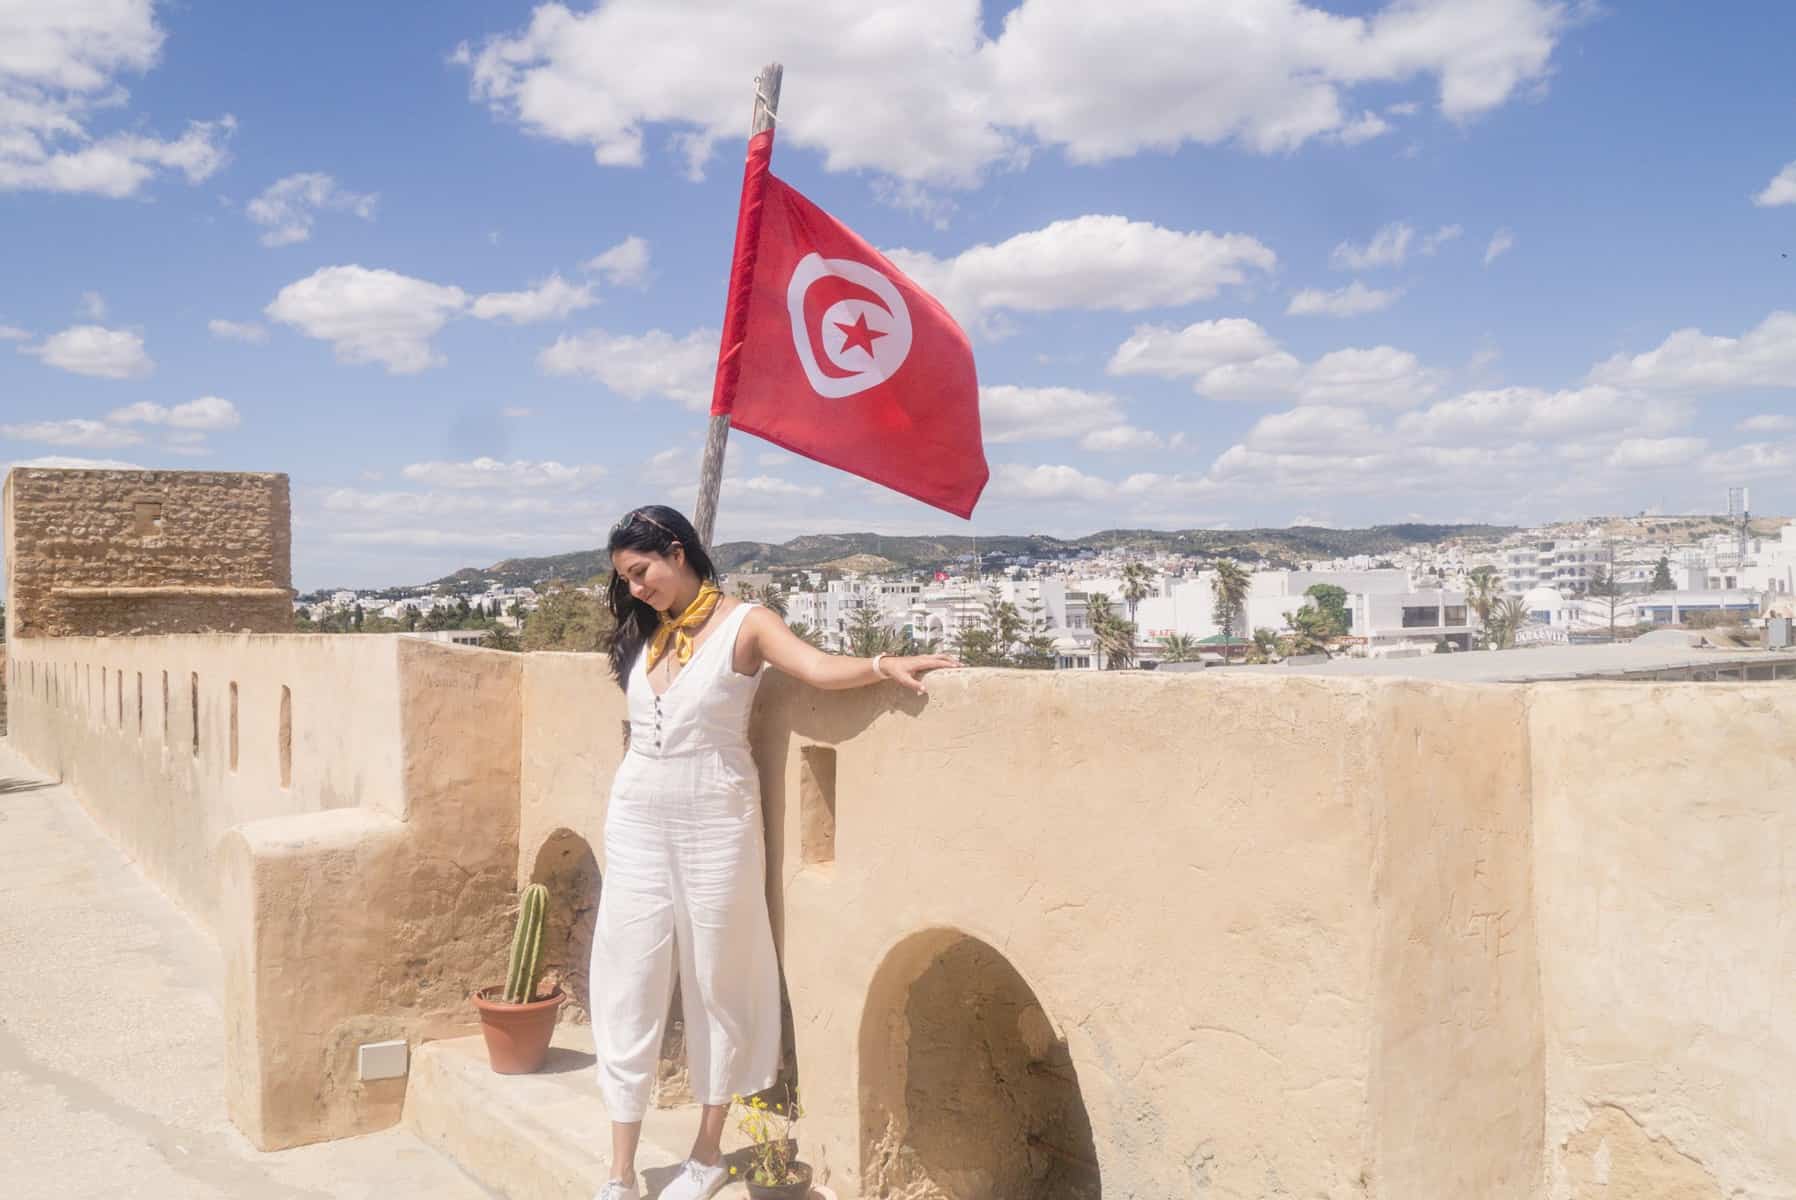 Tunisia: A Guide to Tunisia for First Time Travelers